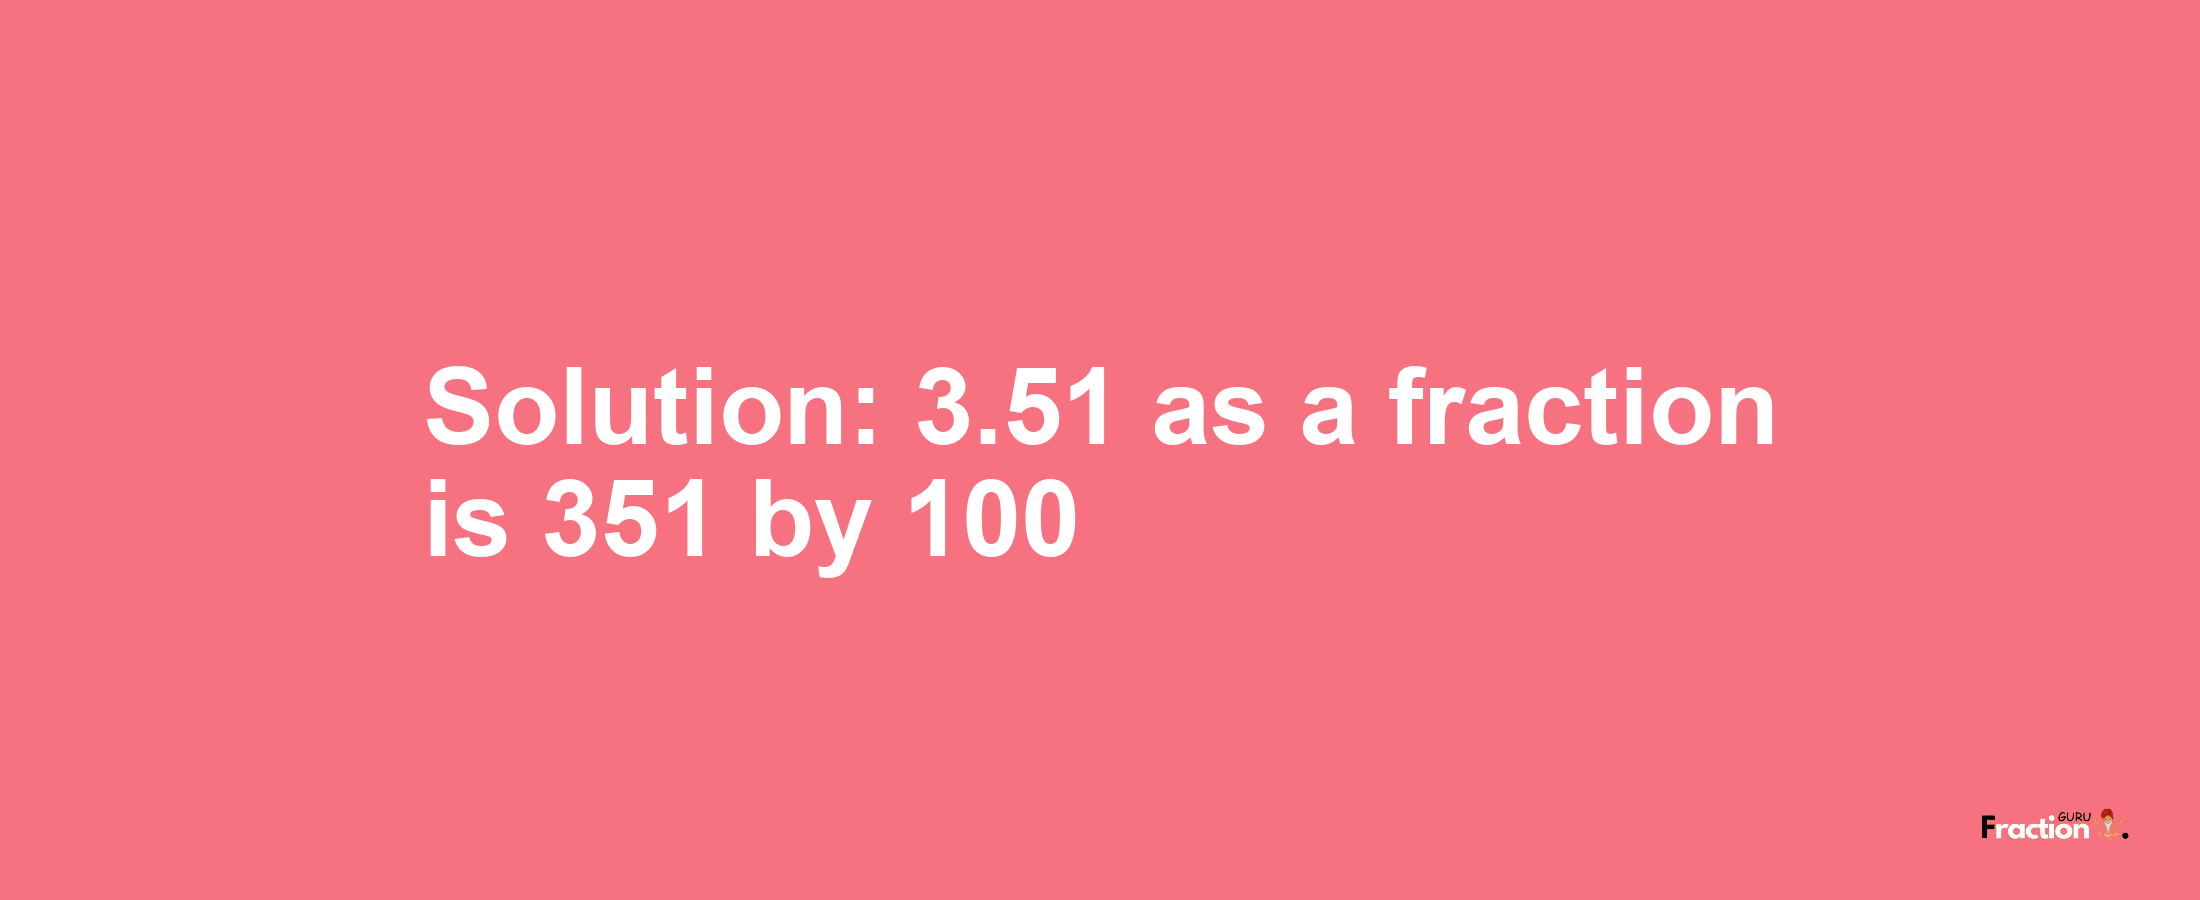 Solution:3.51 as a fraction is 351/100